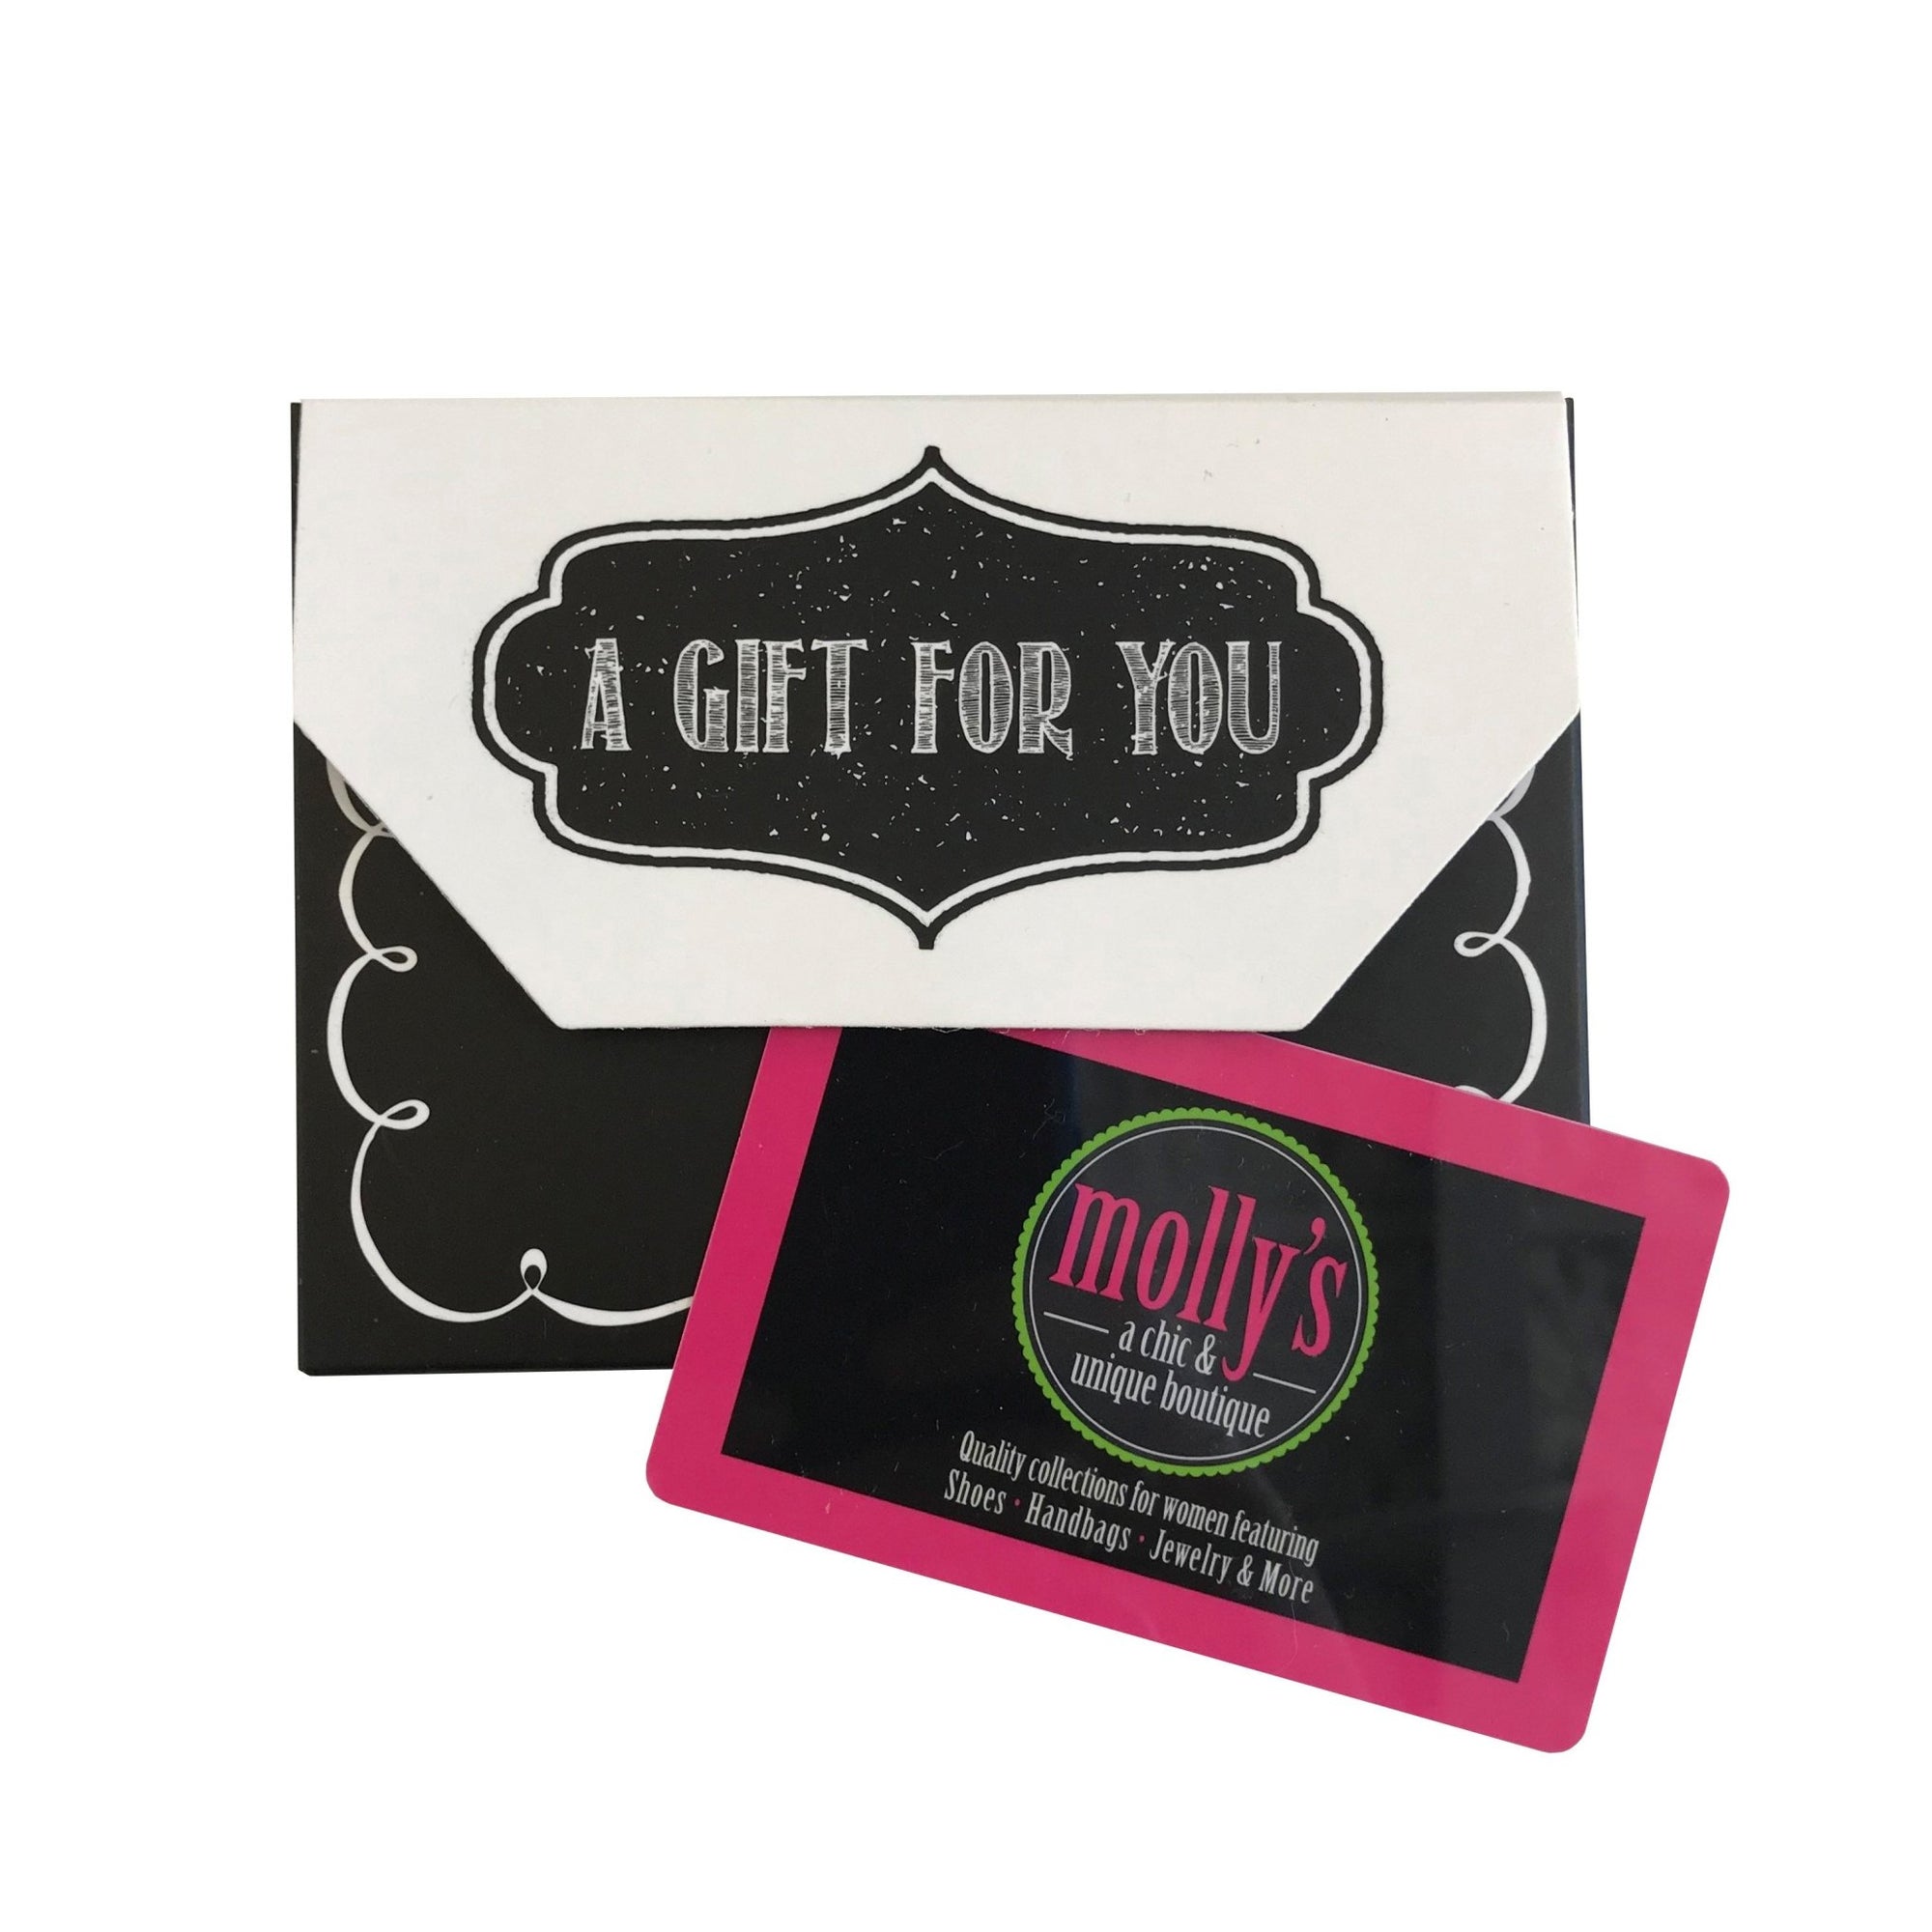 GIFT CARD - Molly's! A Chic and Unique Boutique 